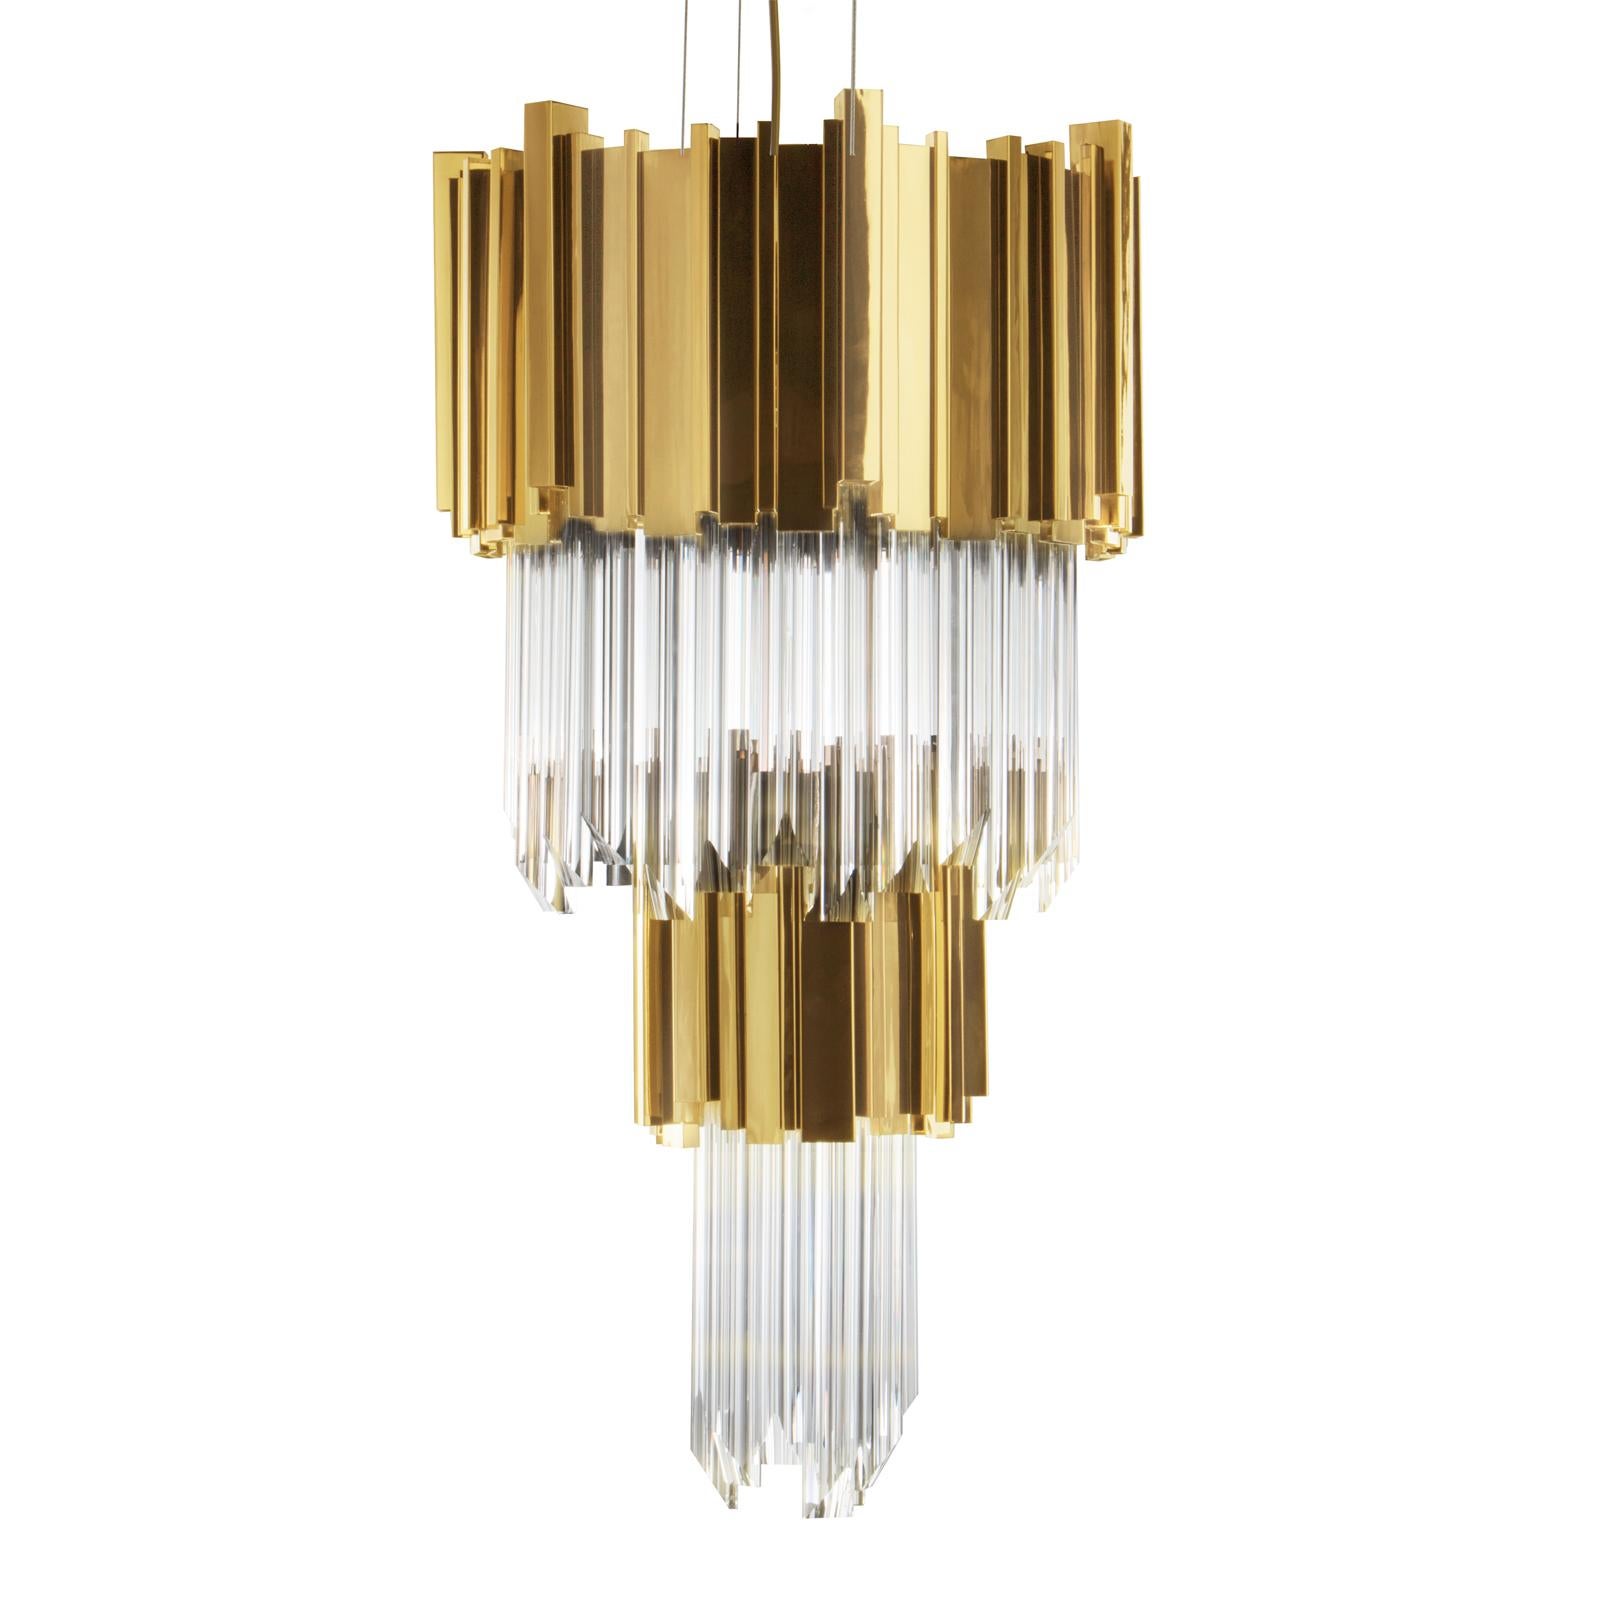 Medium pendant Ambassador with crystal glass pendants.
With 2 circular rows of gold-plated polished brass
rectangular sticks. With 6 bulbs, lamp holder type G9.
10 watt max, for 220-240V. Bulbs not included.
With steel ropes for hanging: 200cm